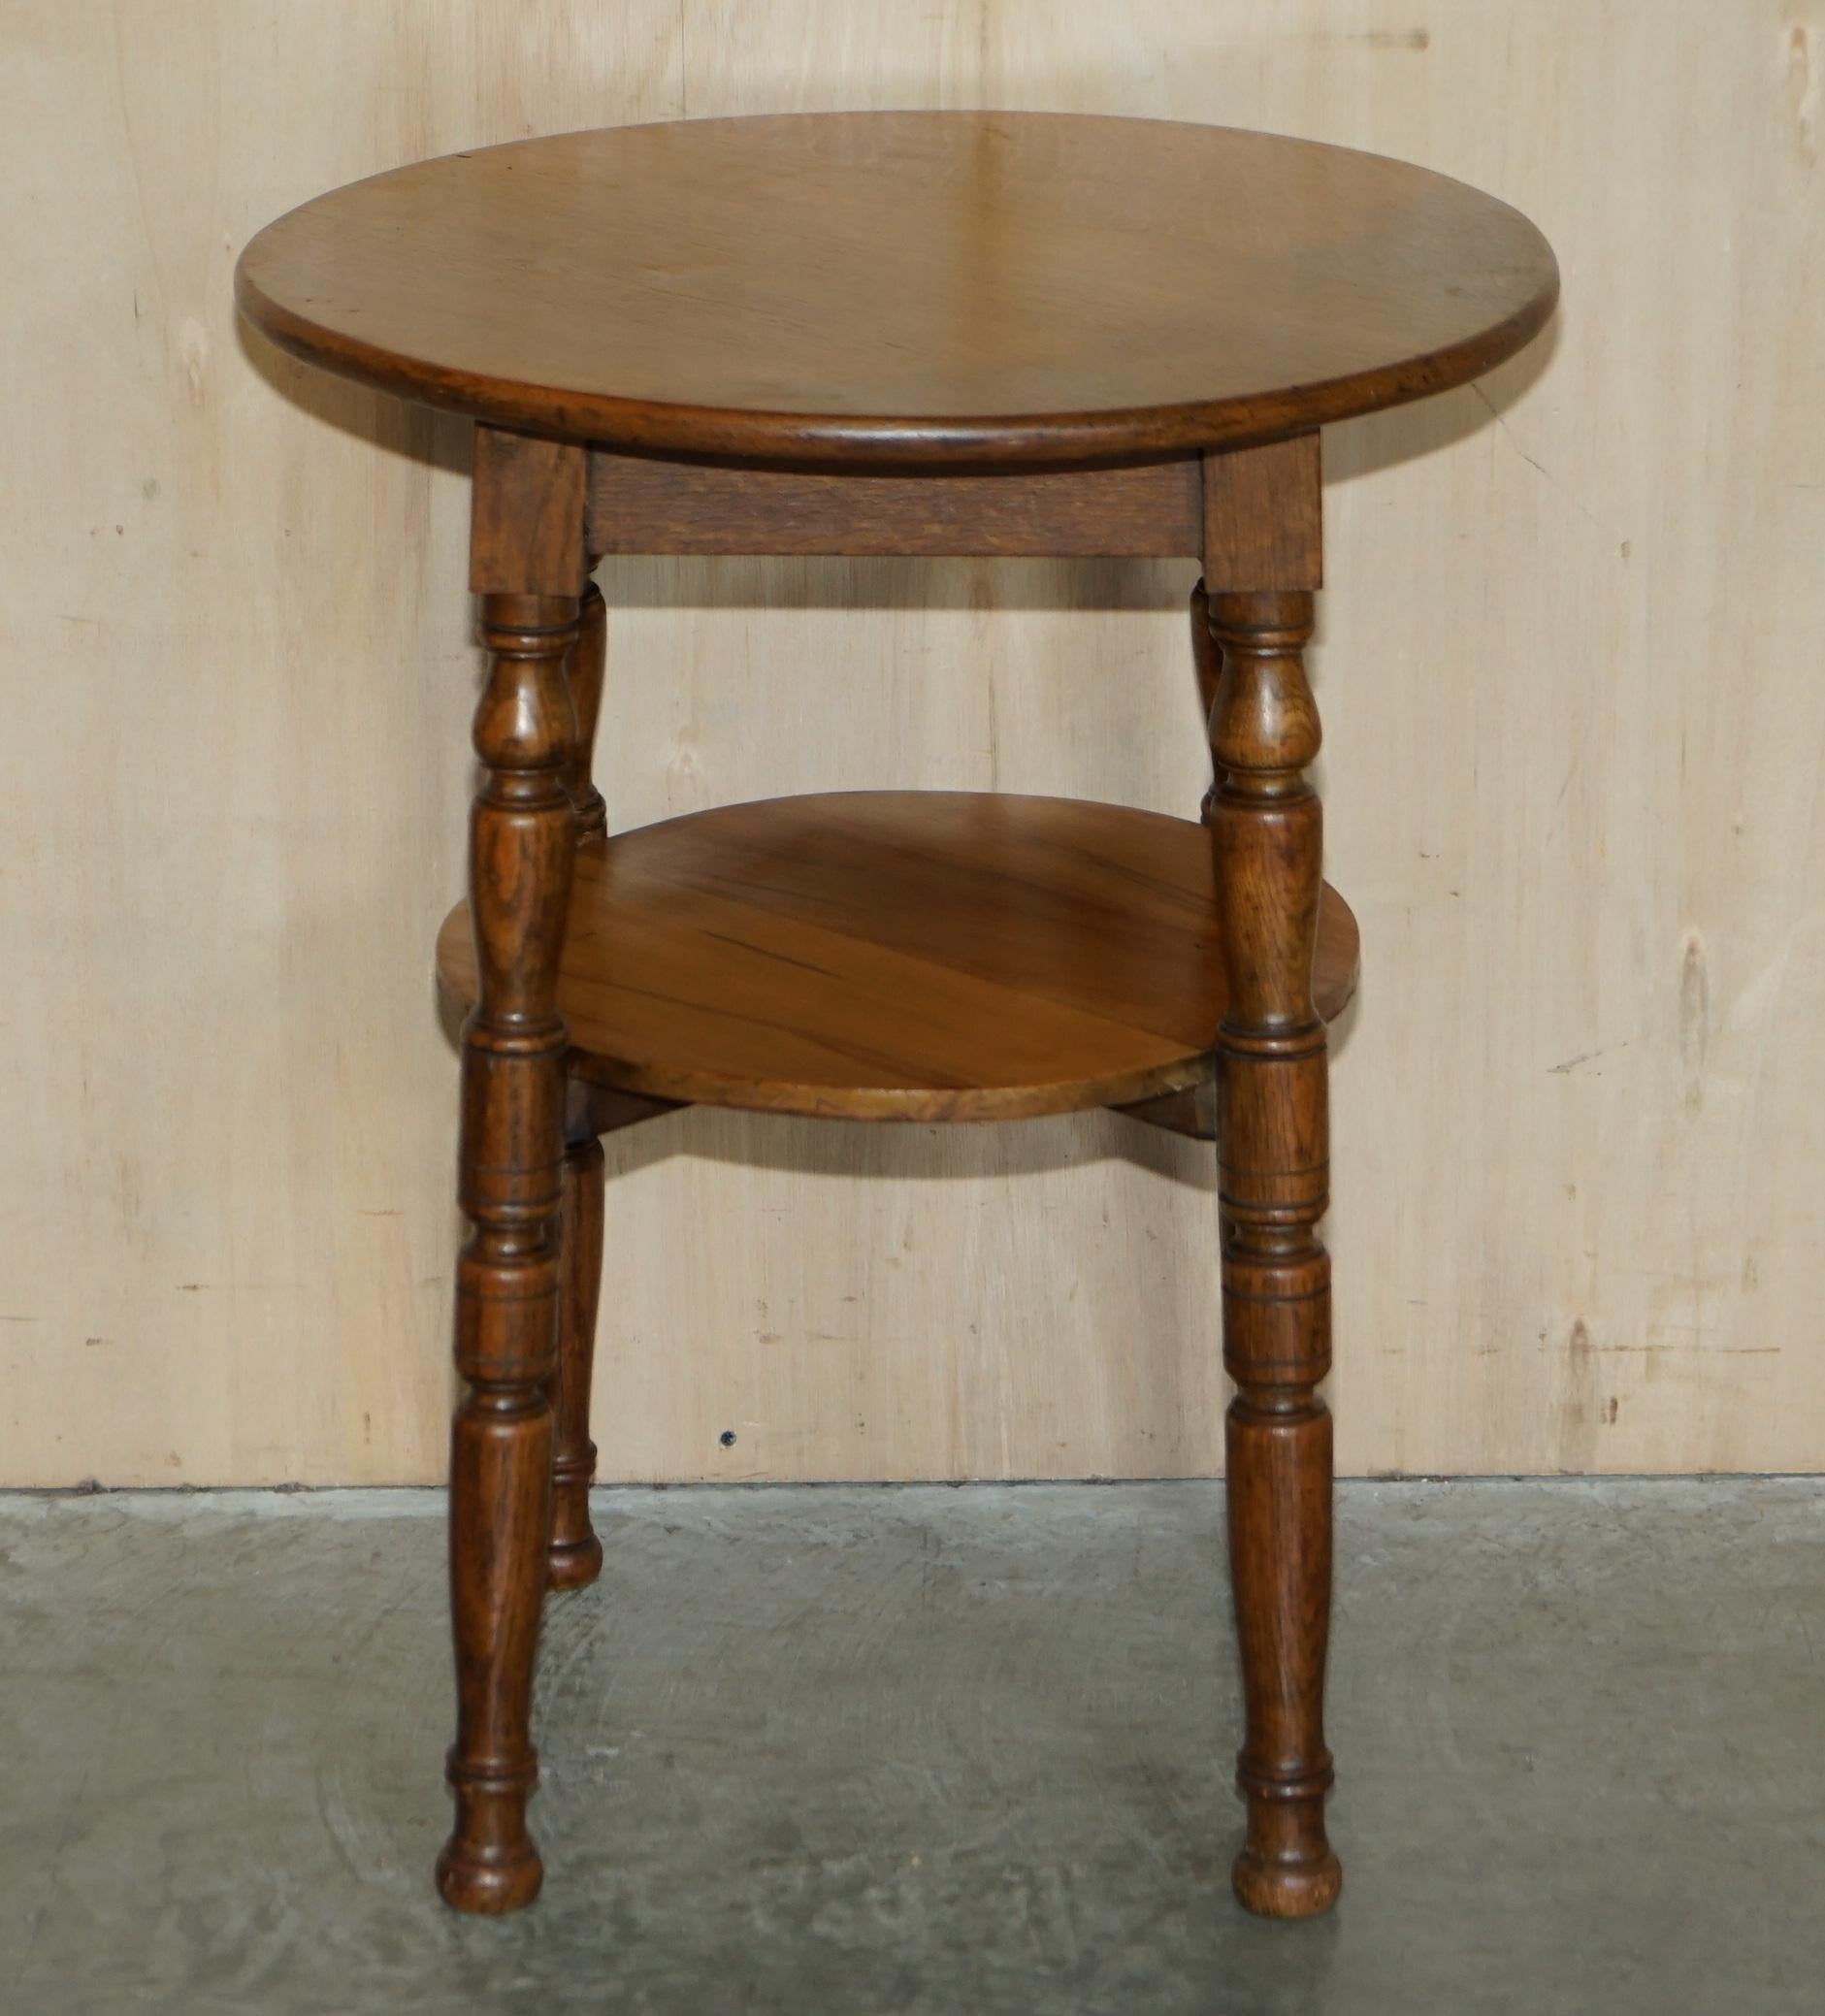 We are delighted to offer for sale this lovely circa 1900 English oak round side table with turned legs

A very good looking well made and decorative piece, the legs are nicely turned, it is a two tier table so you can place a small plant or